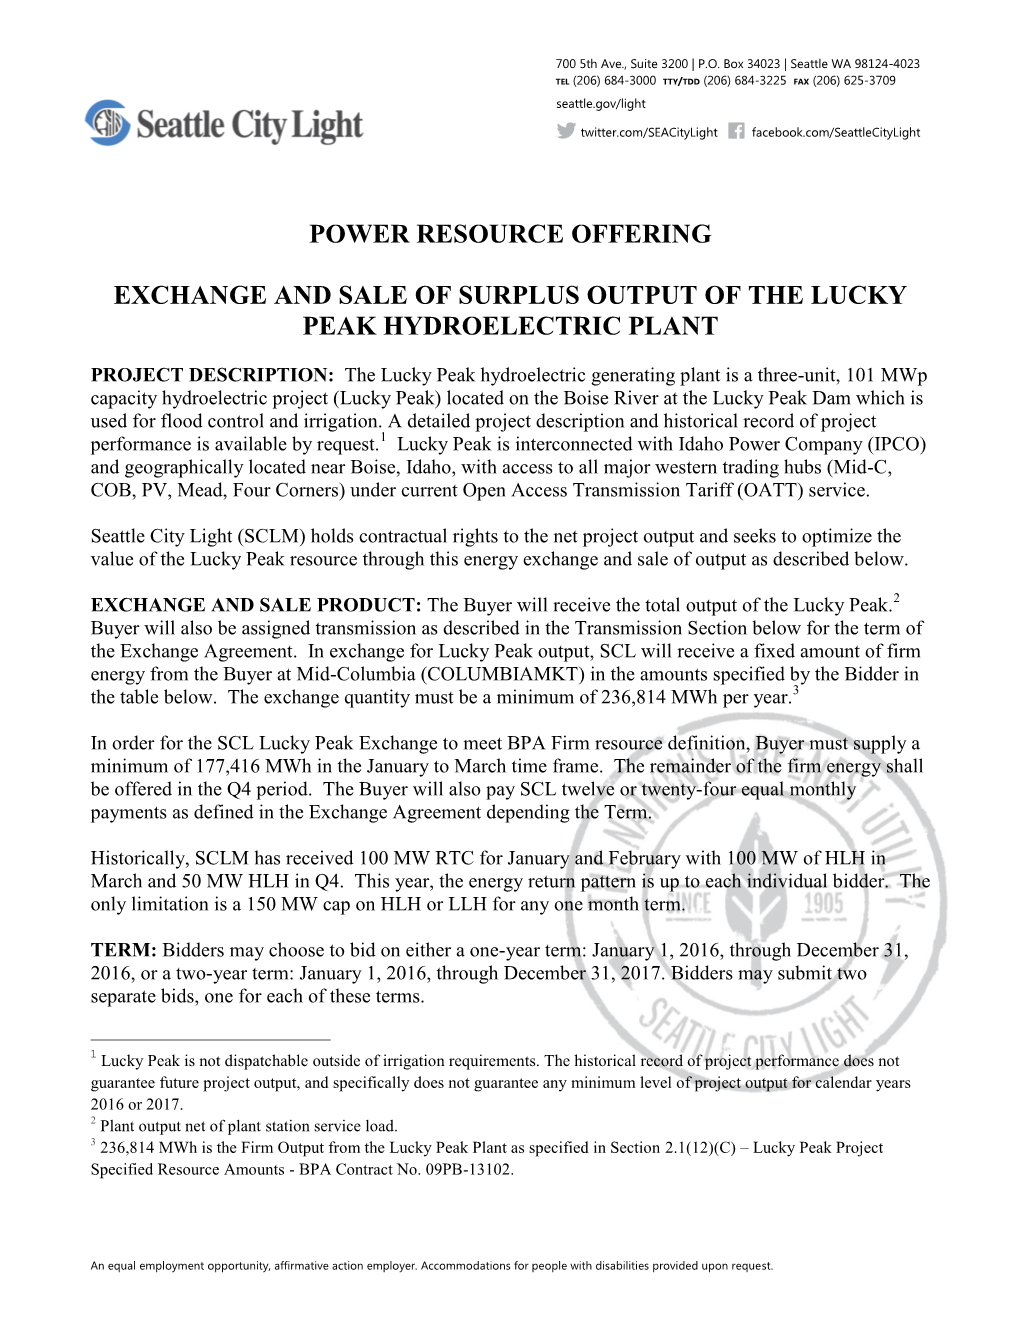 Power Resource Offering Exchange and Sale of Surplus Output of the Lucky Peak Hydroelectric Plant